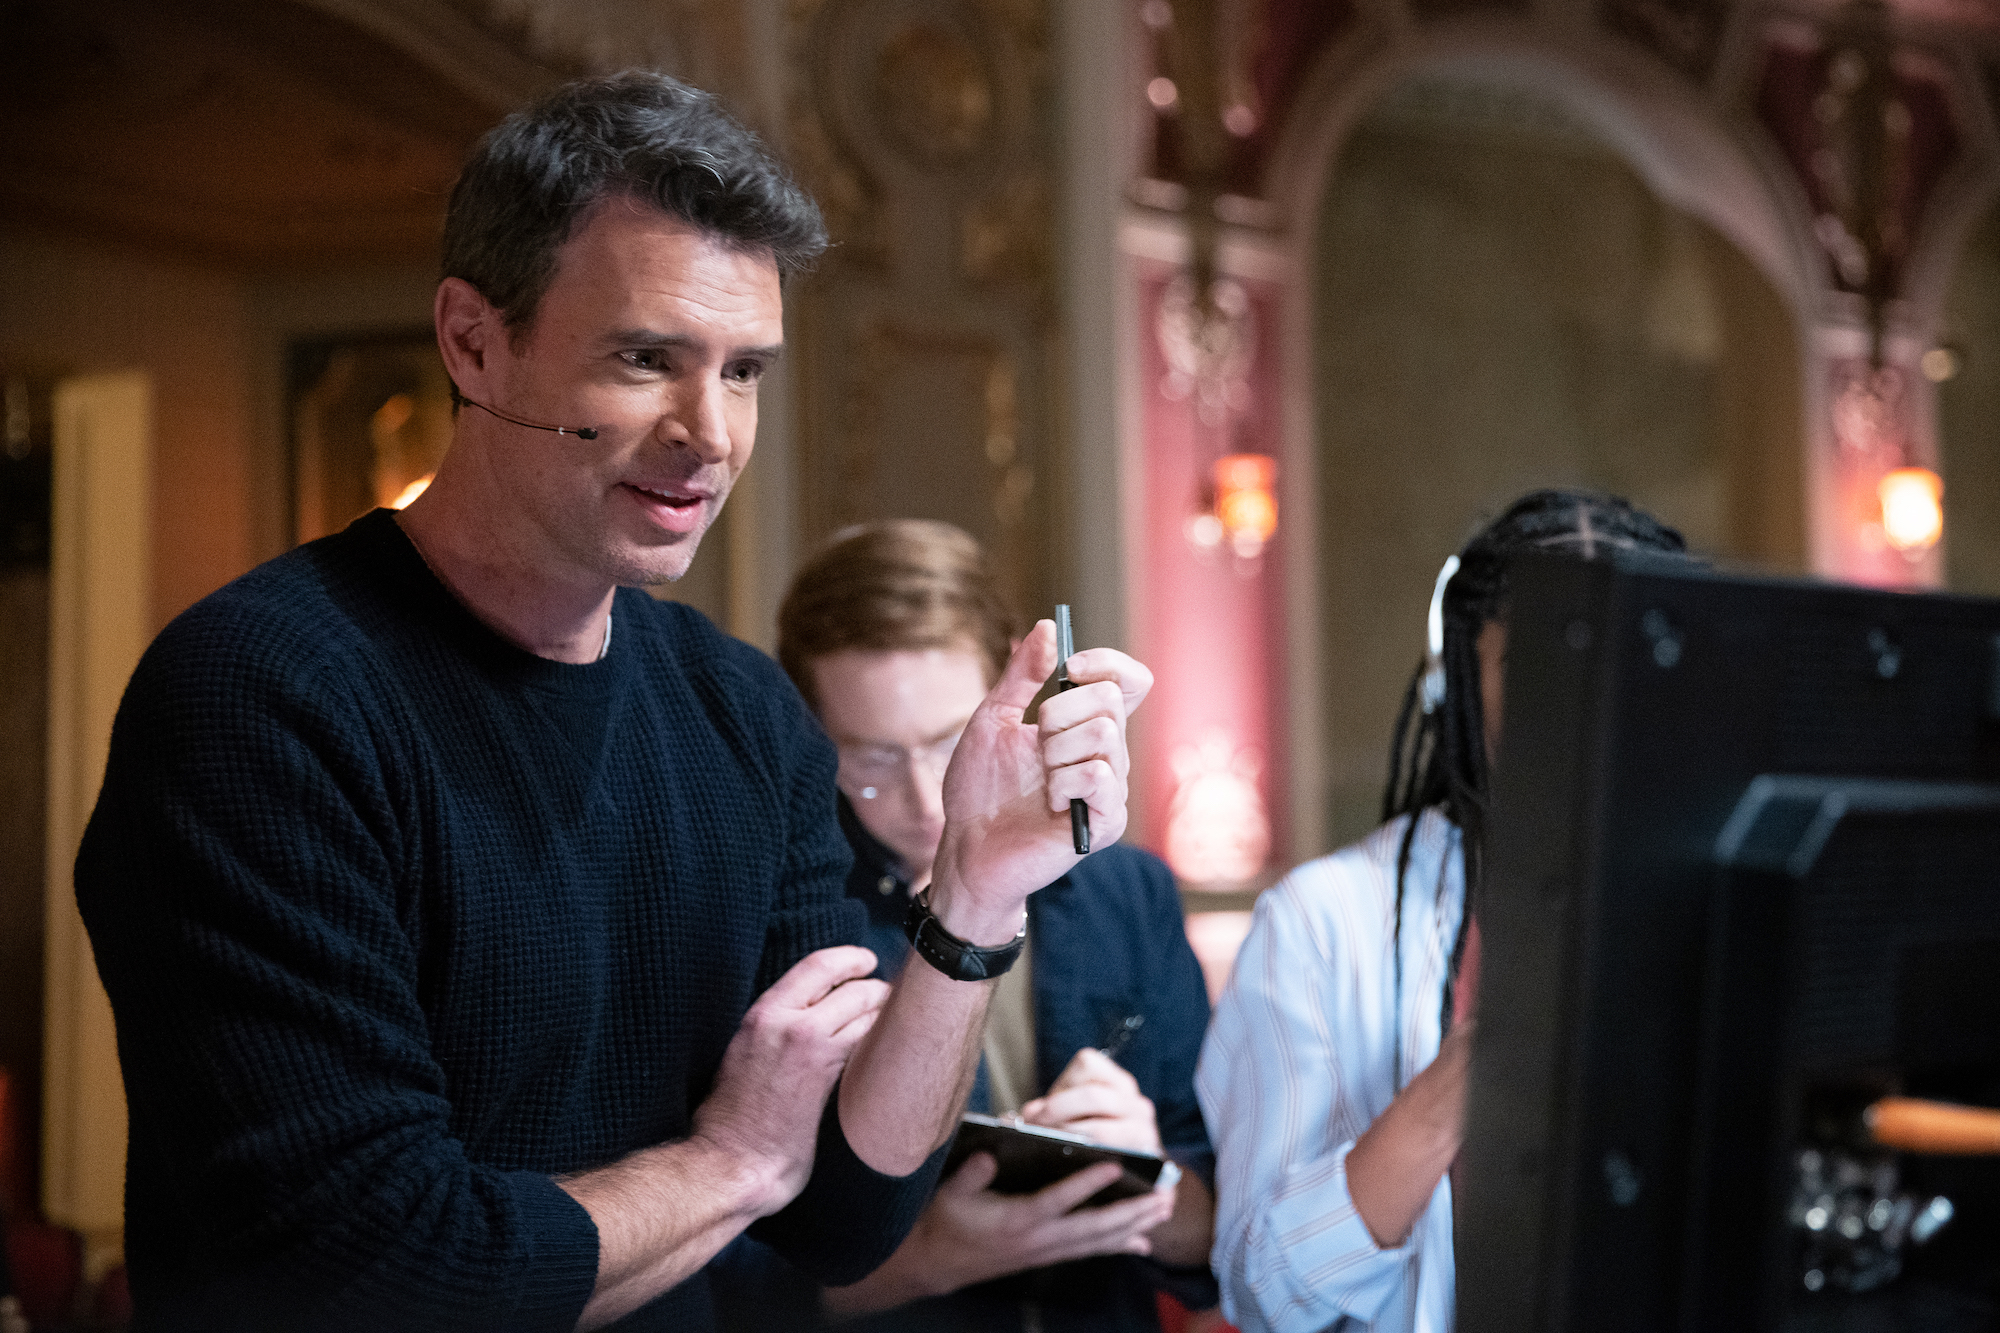 Scott Foley watches a monitor in The Big Leap